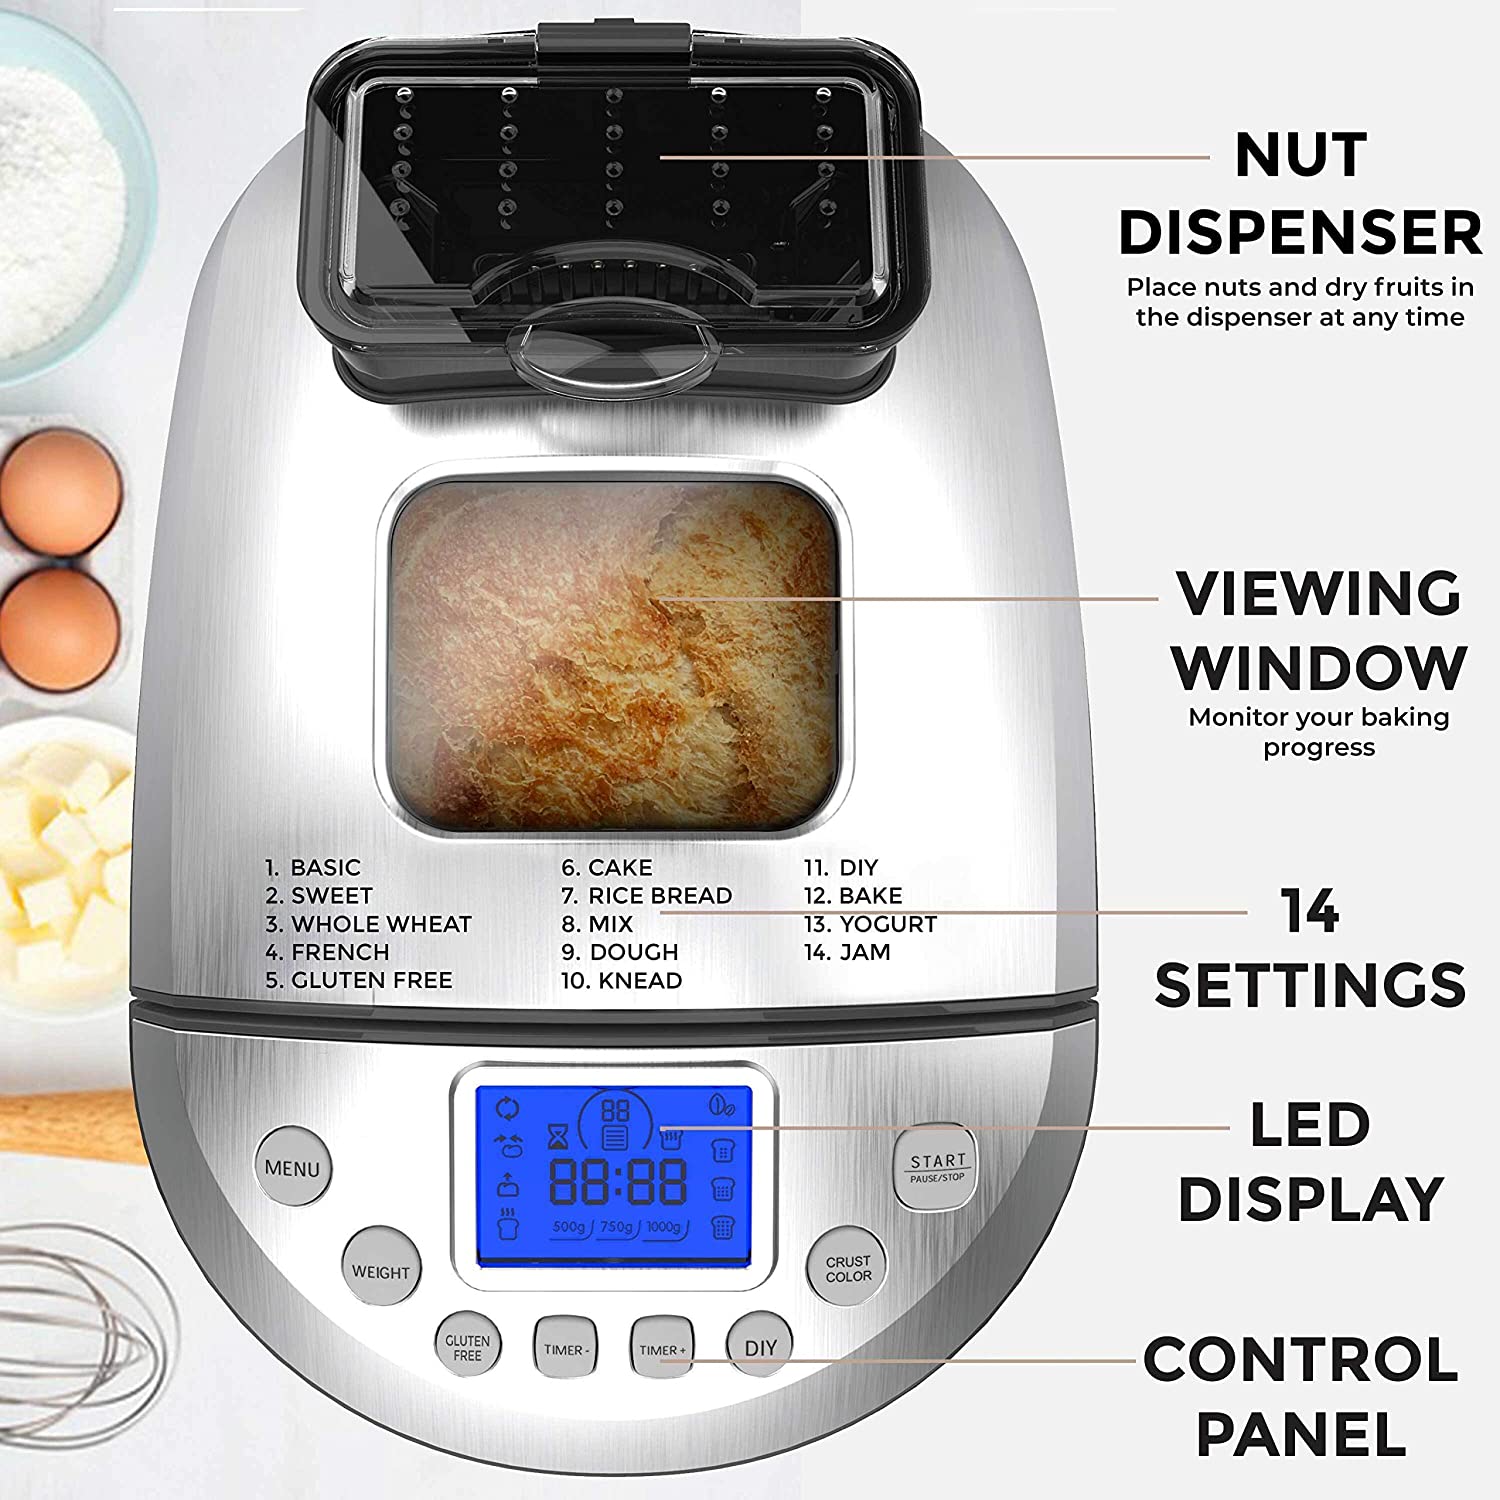 Pohl Schmitt Stainless Steel Bread Machine Bread Maker, 2LB 17-in-1, 14 Settings Incl Gluten Free & Fruit, Nut Dispenser, Nonstick Pan, 3 Loaf Sizes 3 Crust Colors, Keep Warm, and Recipes - image 2 of 7